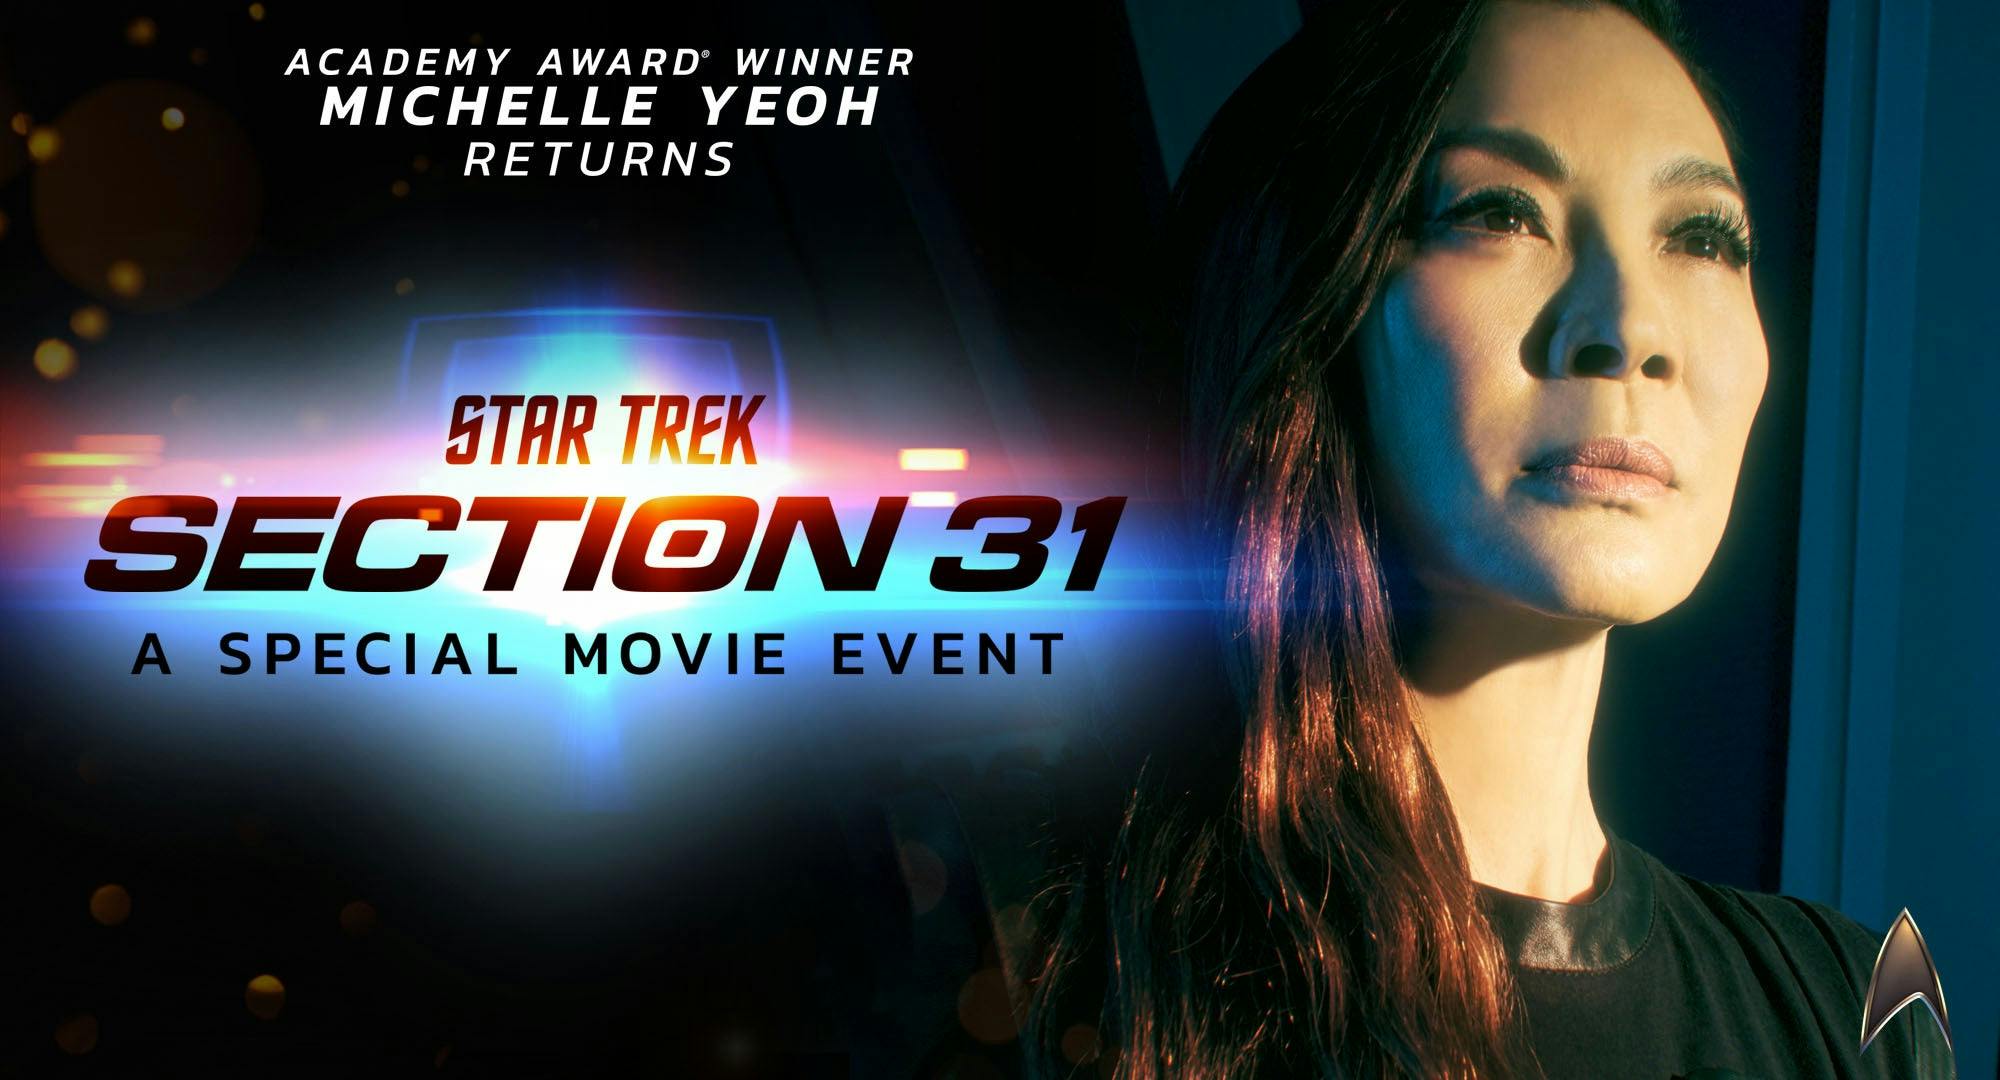 promotional art work featuring Michelle Yeoh as Philippa Georgiou for Star Trek: Section 31